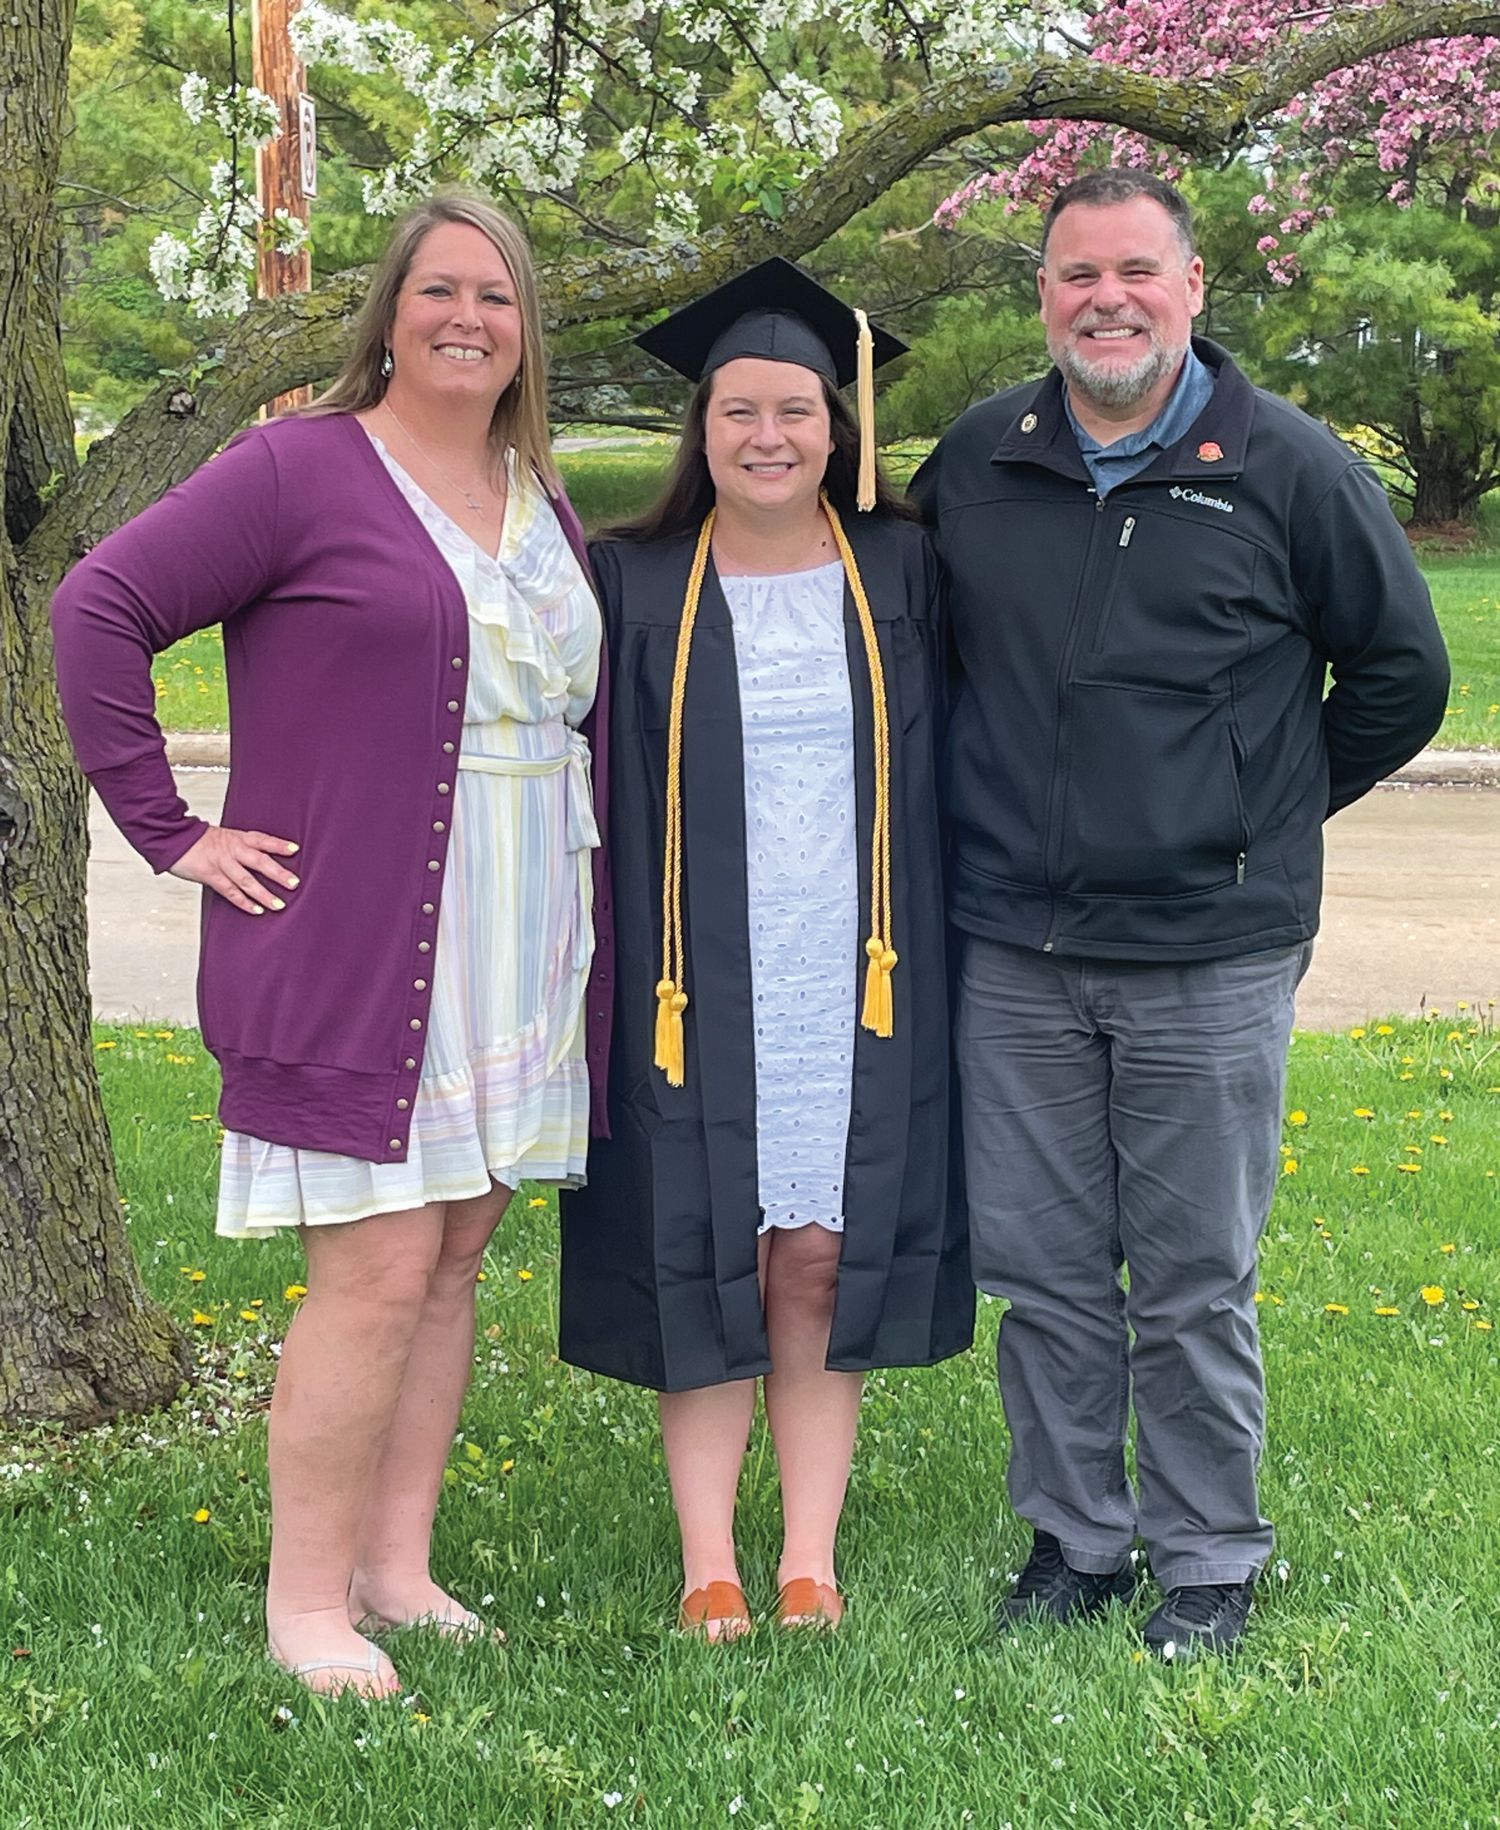 Anne Wilson with her husband and their daughter. The daughter is in a cap and gown